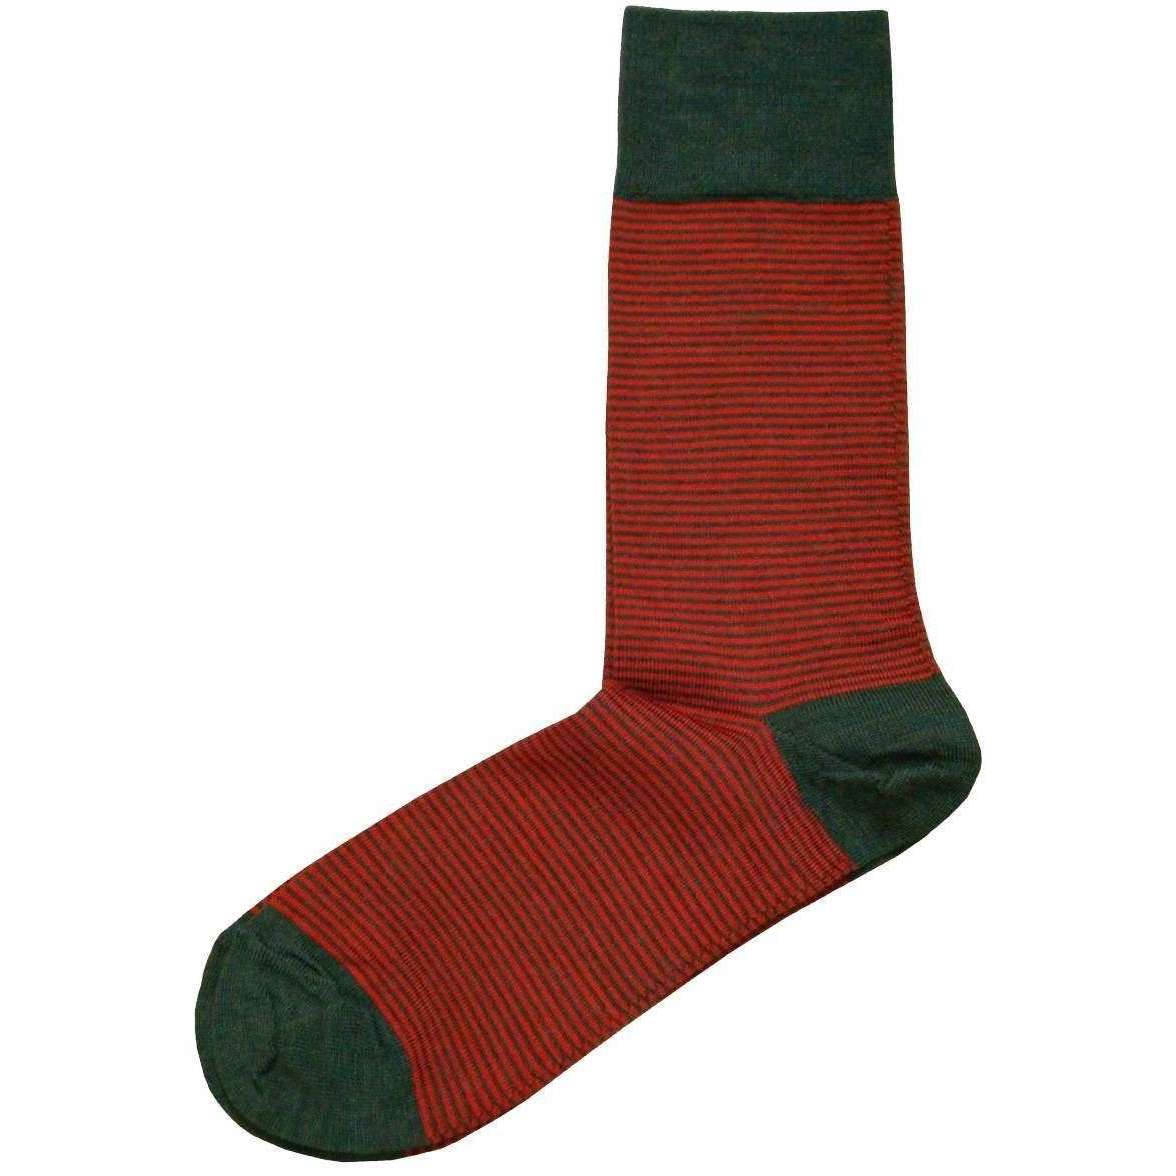 Bassin and Brown Thin Stripe Socks - Red/Green